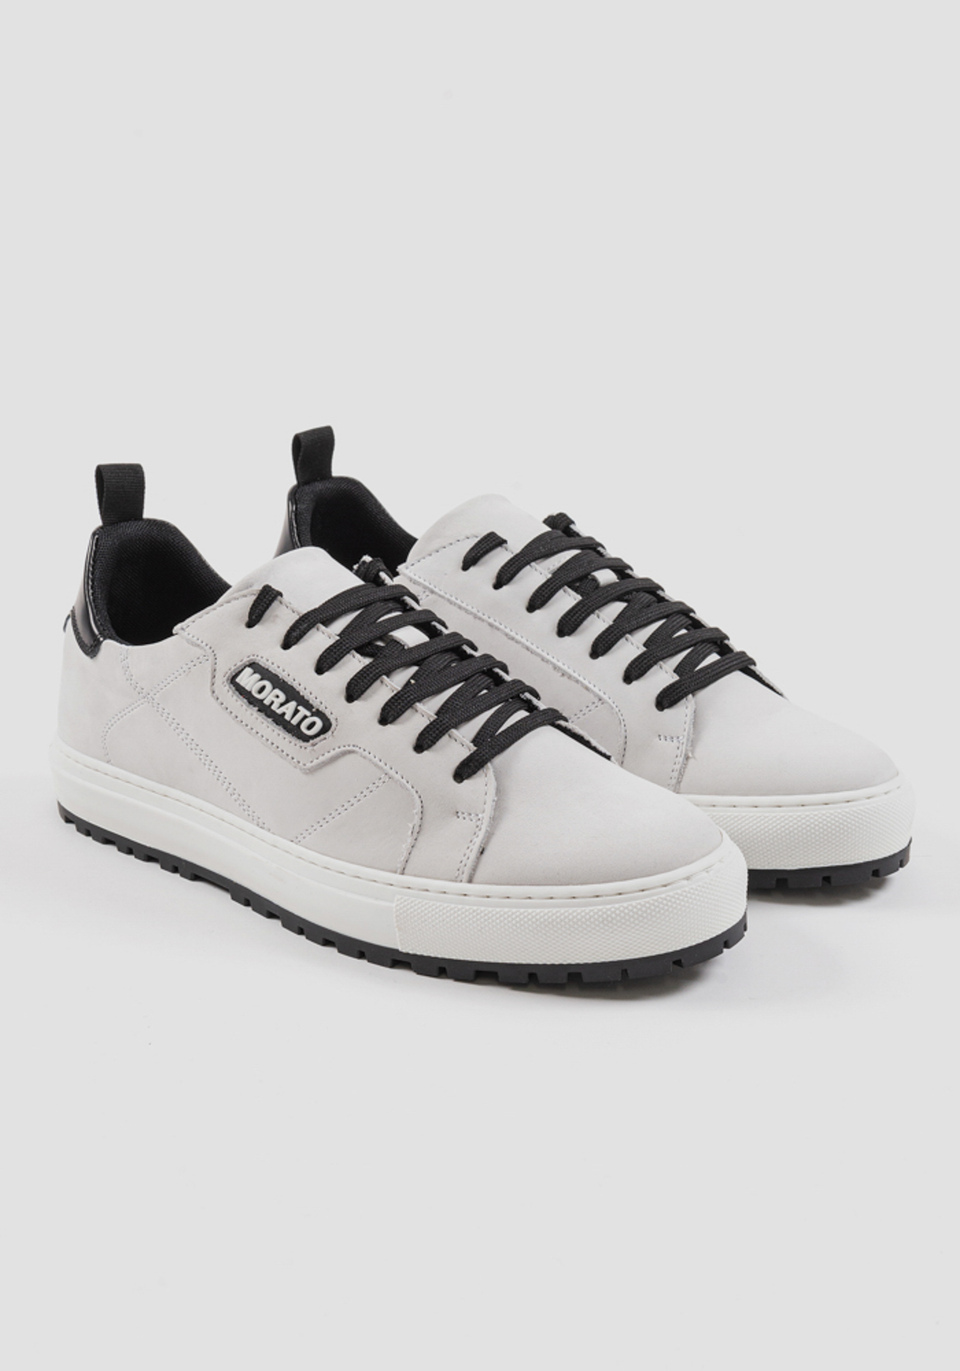 “CROFT” TRAINERS IN RECYCLED SUEDE-EFFECT NUBUCK - Antony Morato Online Shop